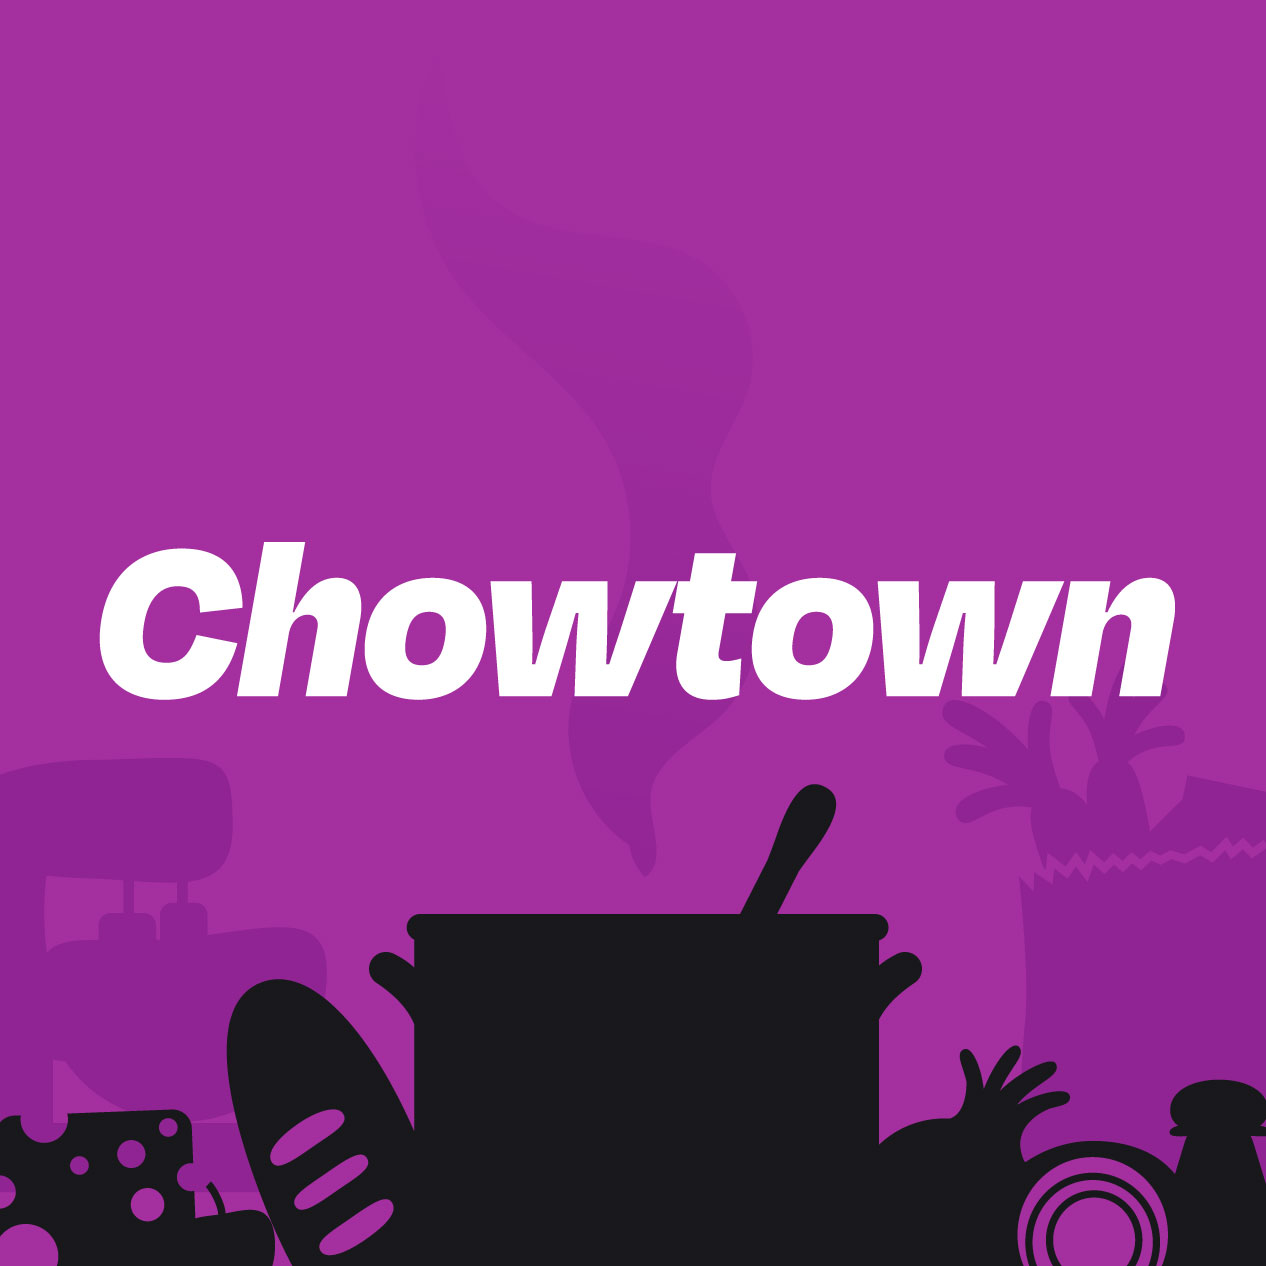 Chowtown